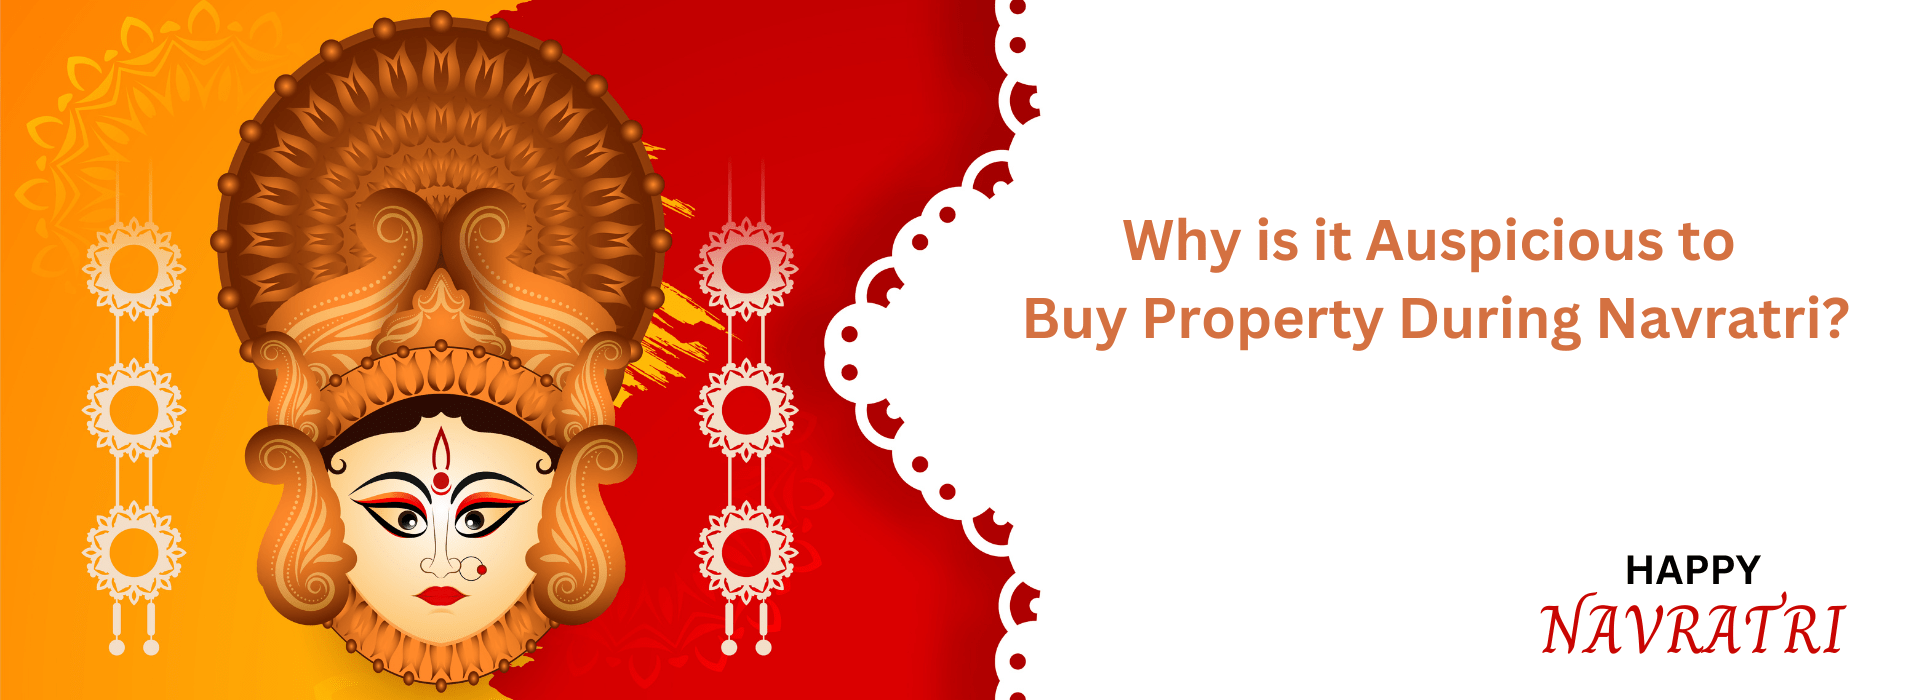 Why is it Auspicious to Buy Property During Navaratri?